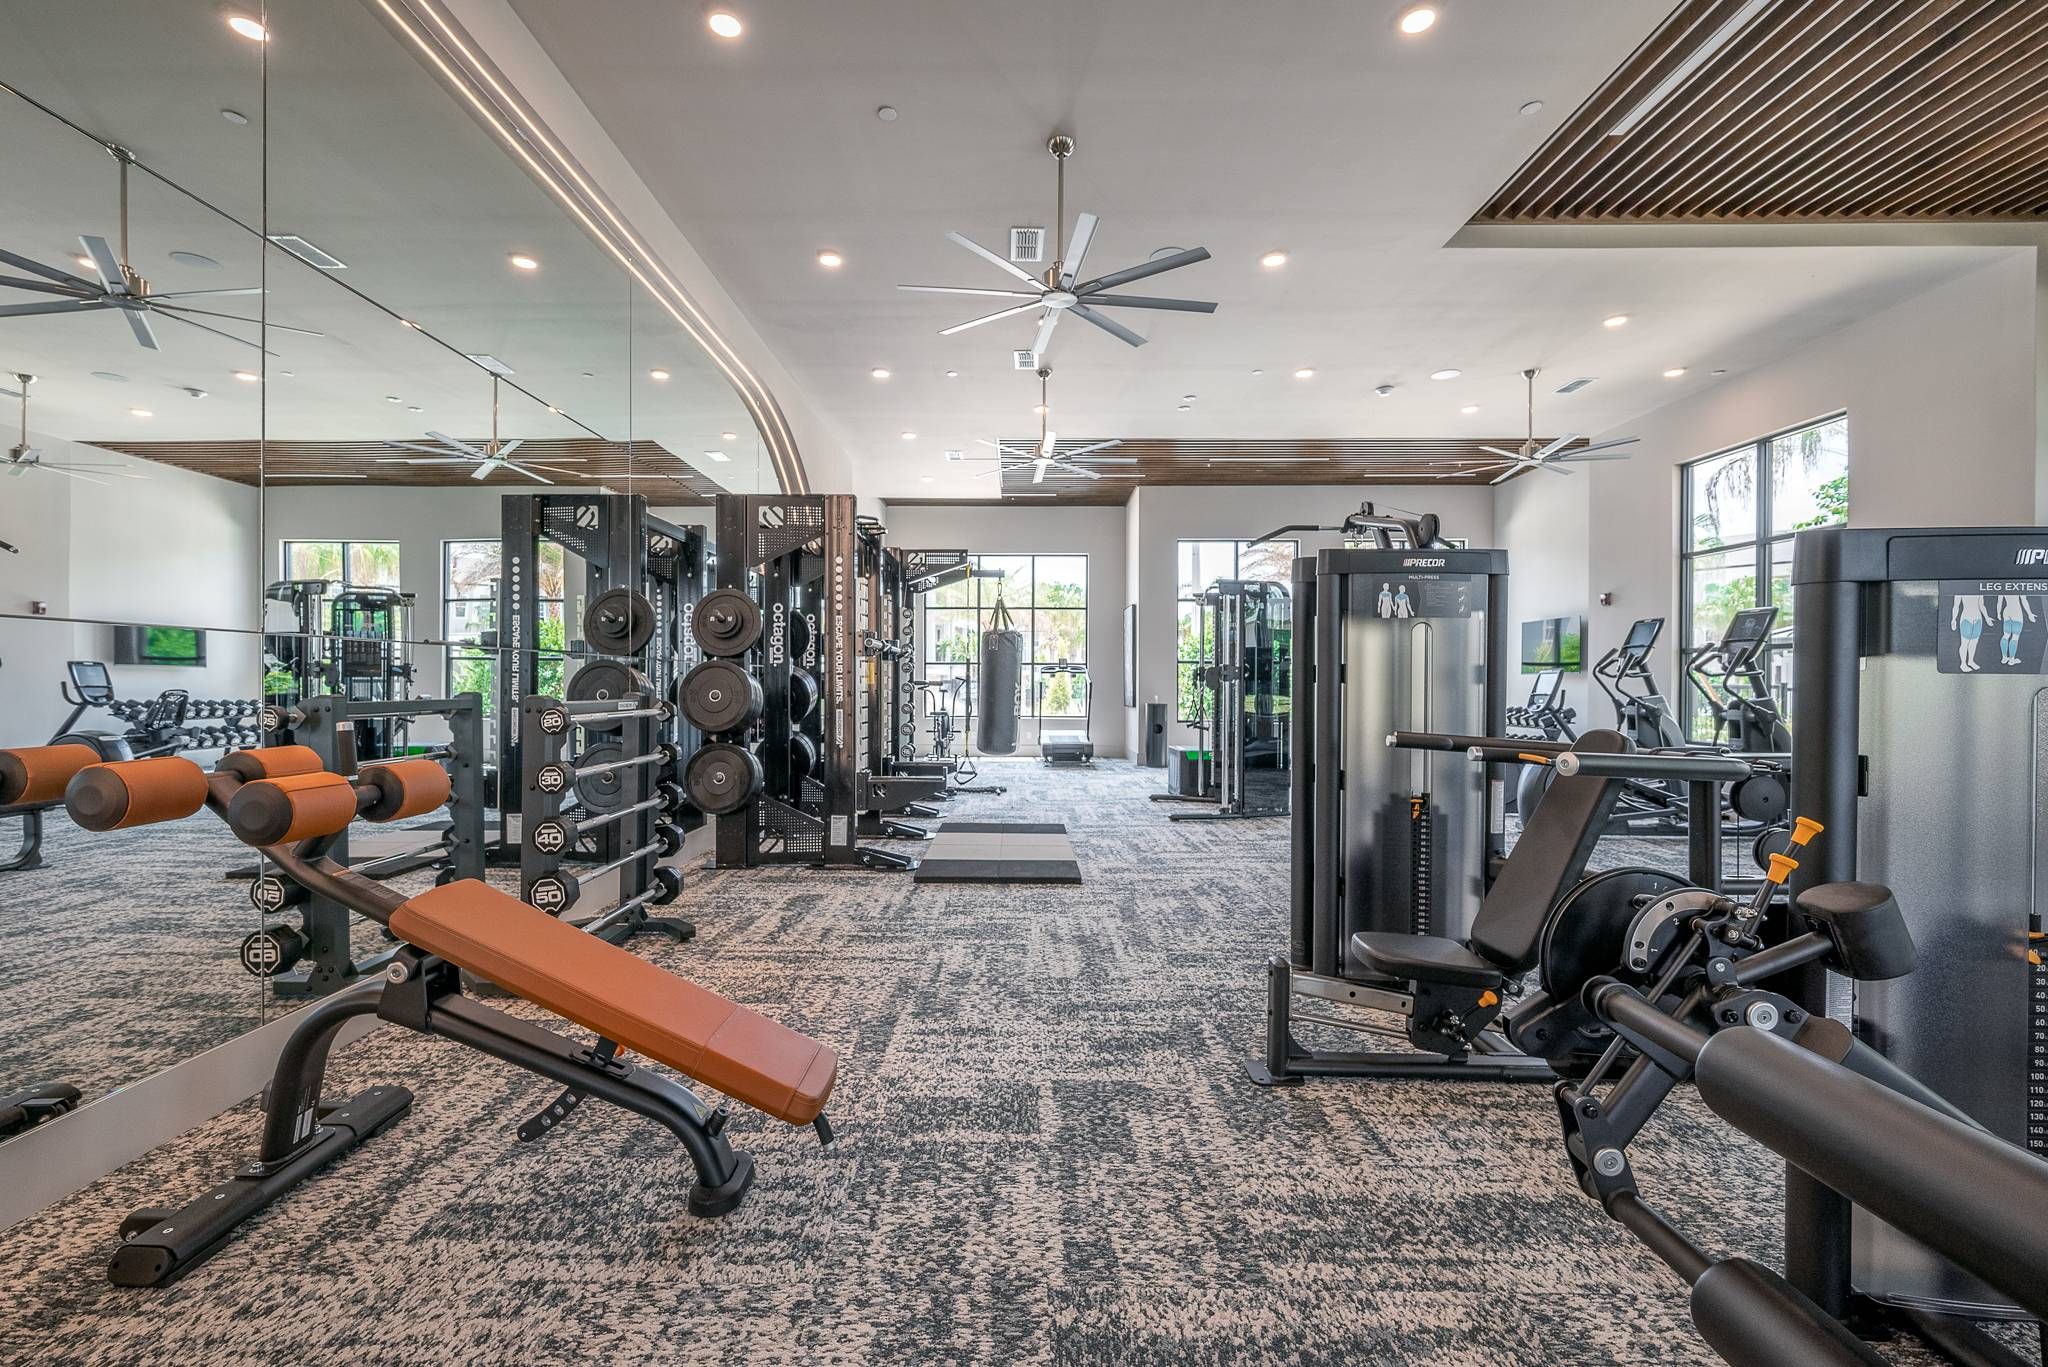 A spacious, well-equipped gym with multiple workout stations and large ceiling fans at Alta at Horizon West.